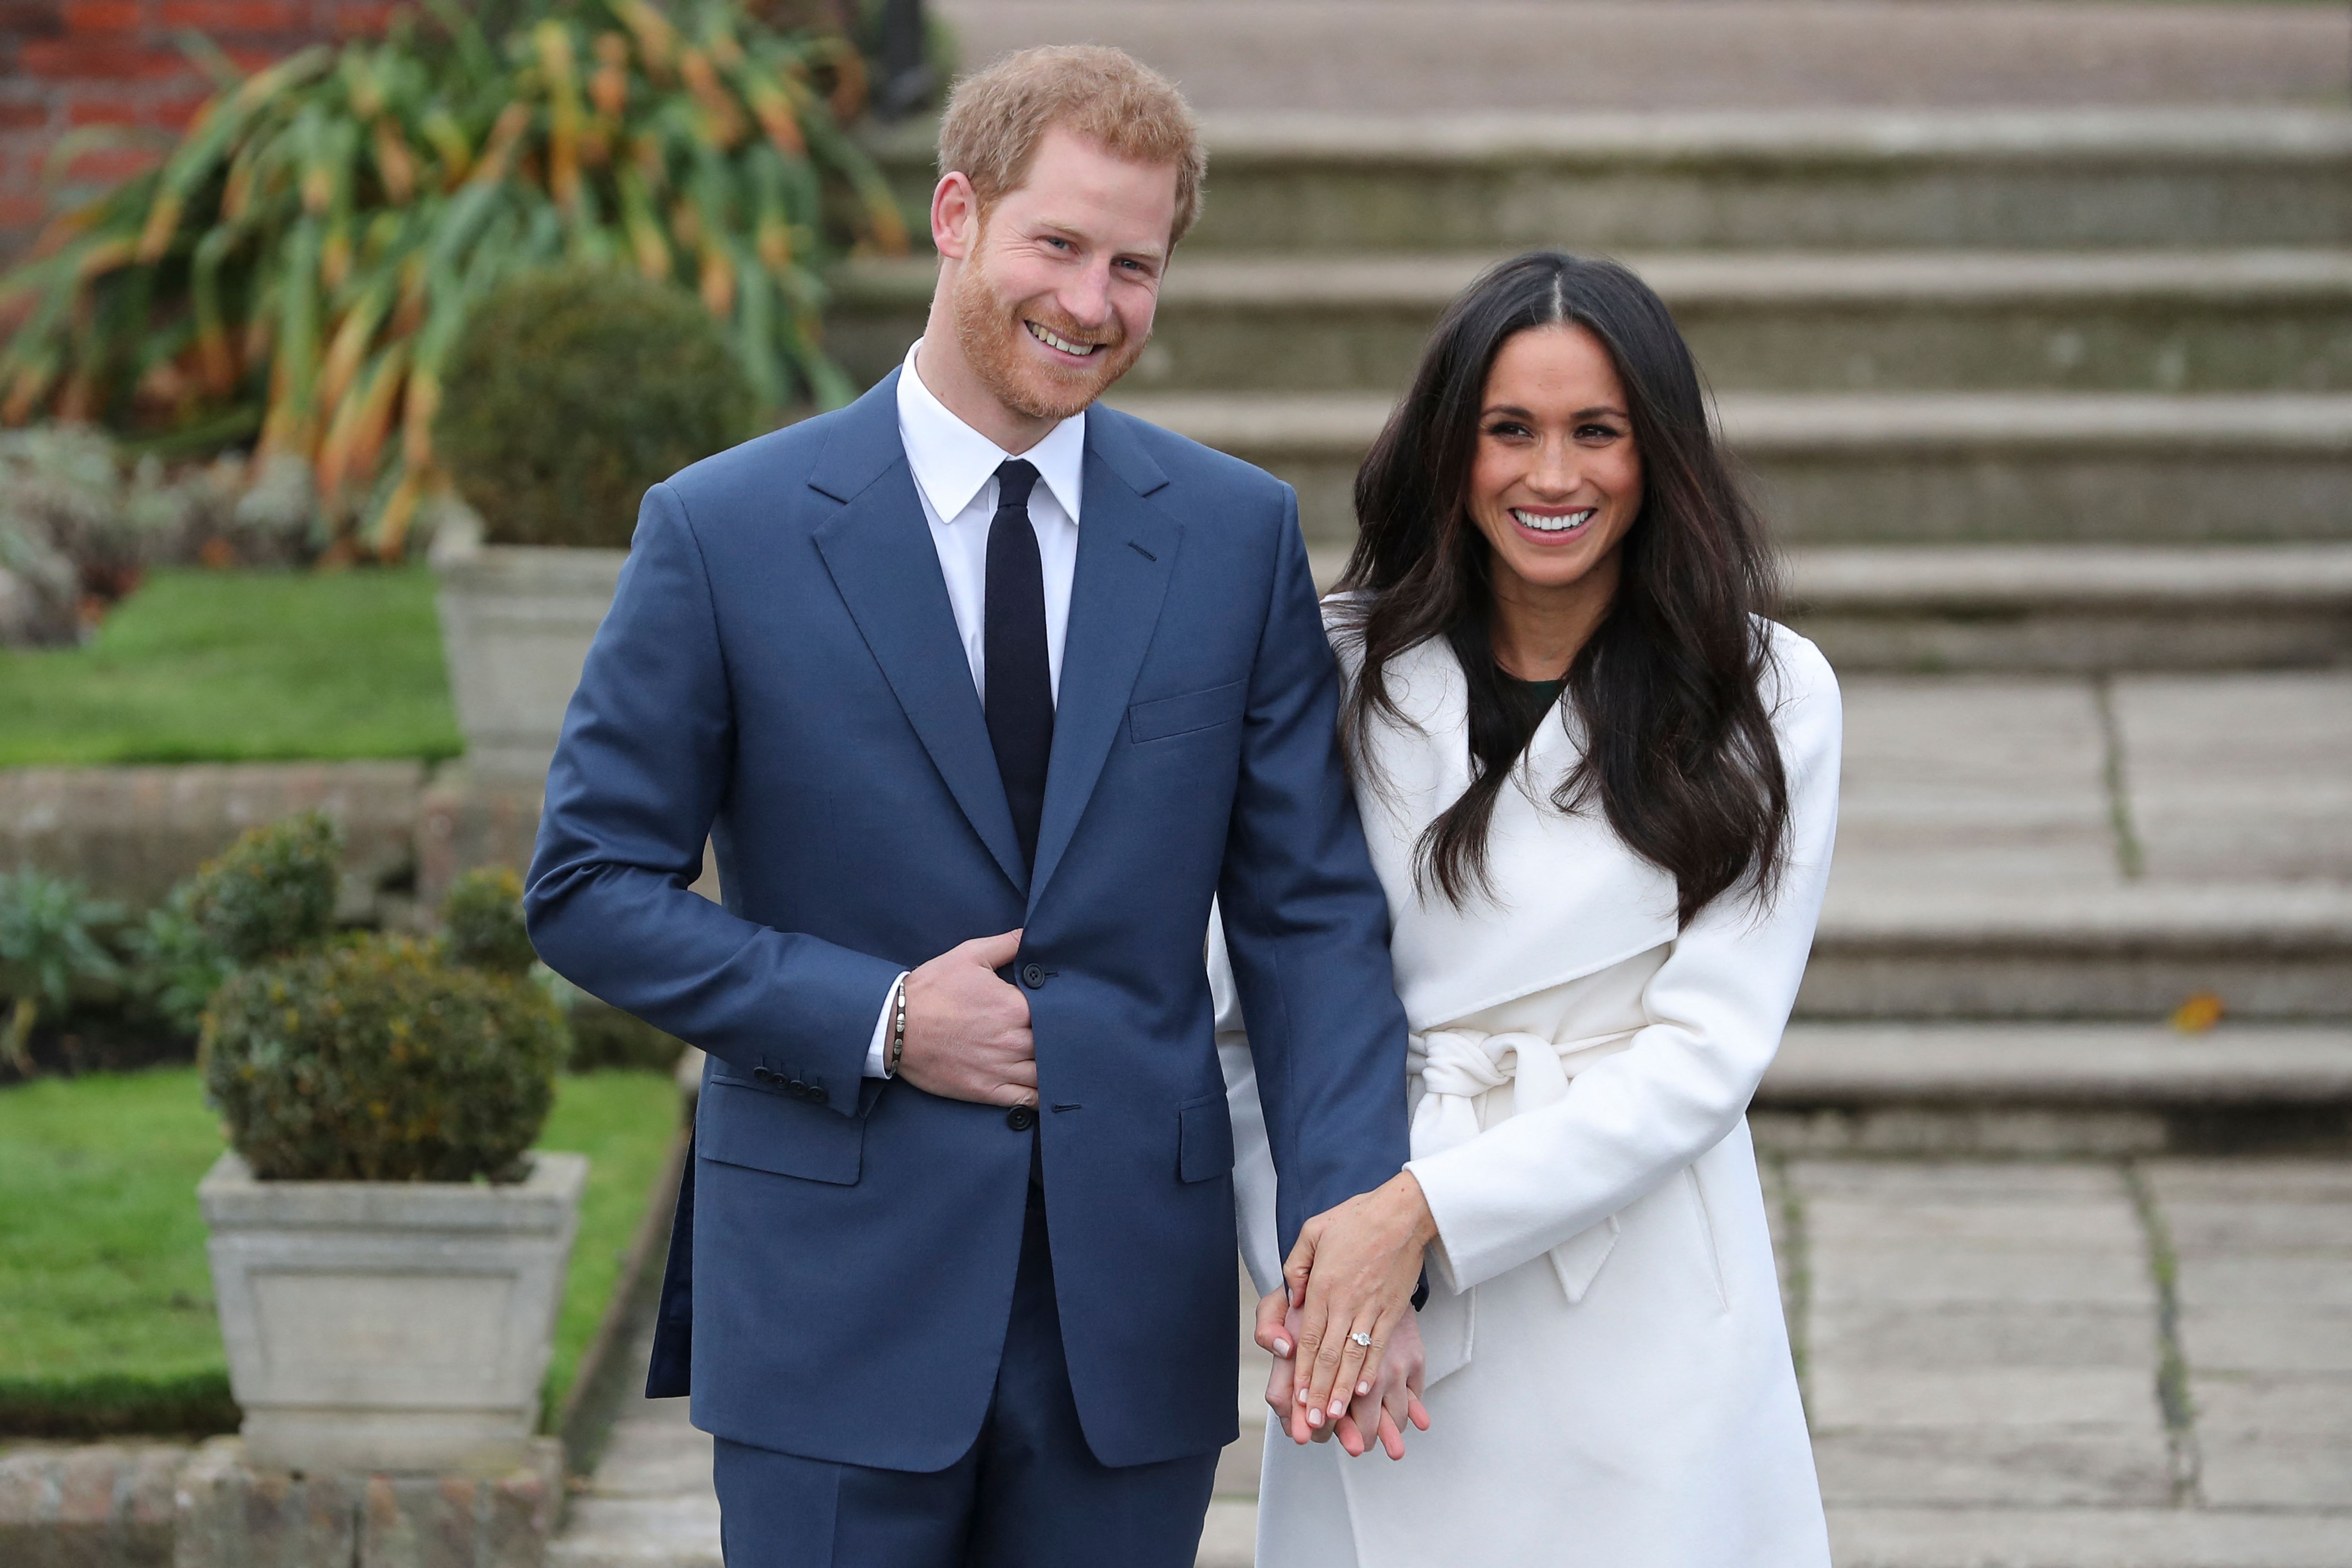 Prince Harry and his fiancée actress Meghan Markle posing for a photograph in the Sunken Garden at Kensington Palace in west London on November 27, 2017. | Source: Getty Images